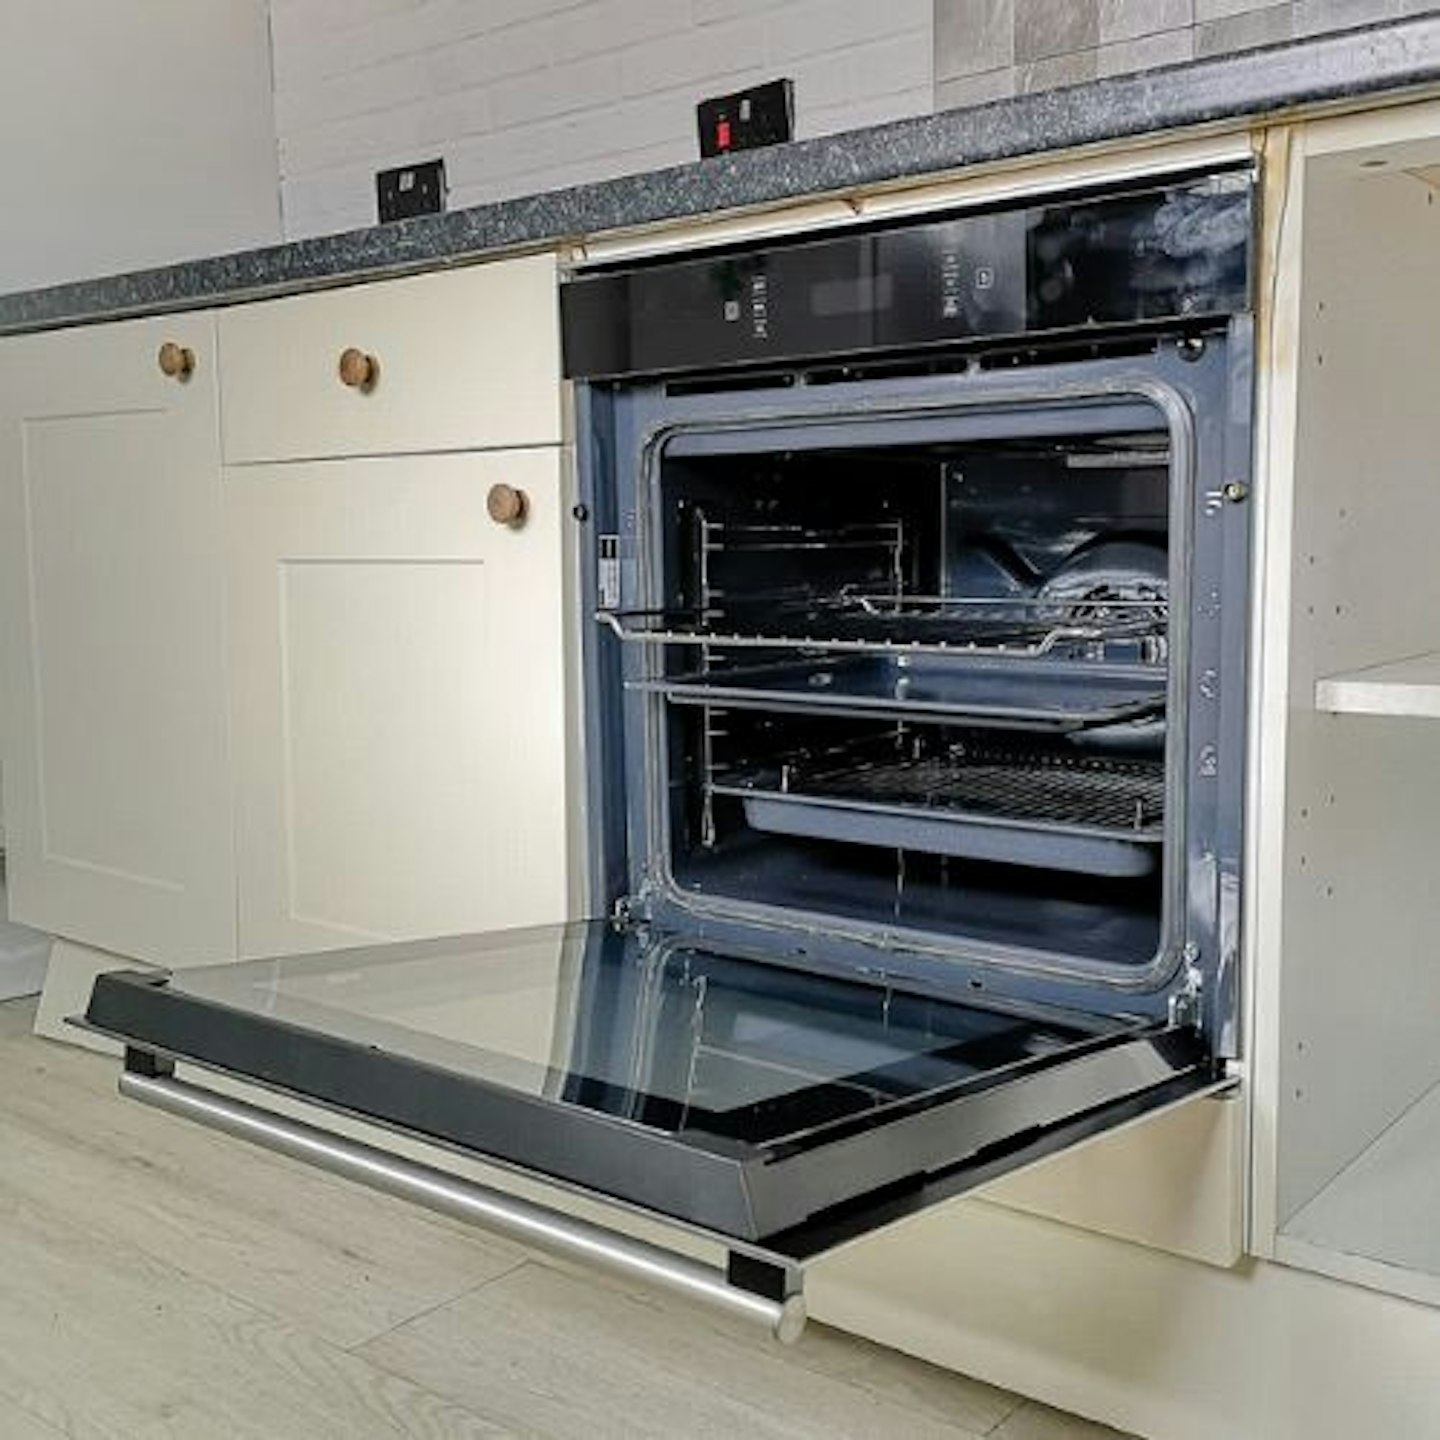 Hotpoint Class 6 SI6 874 SH IX Single Built-In Oven tested